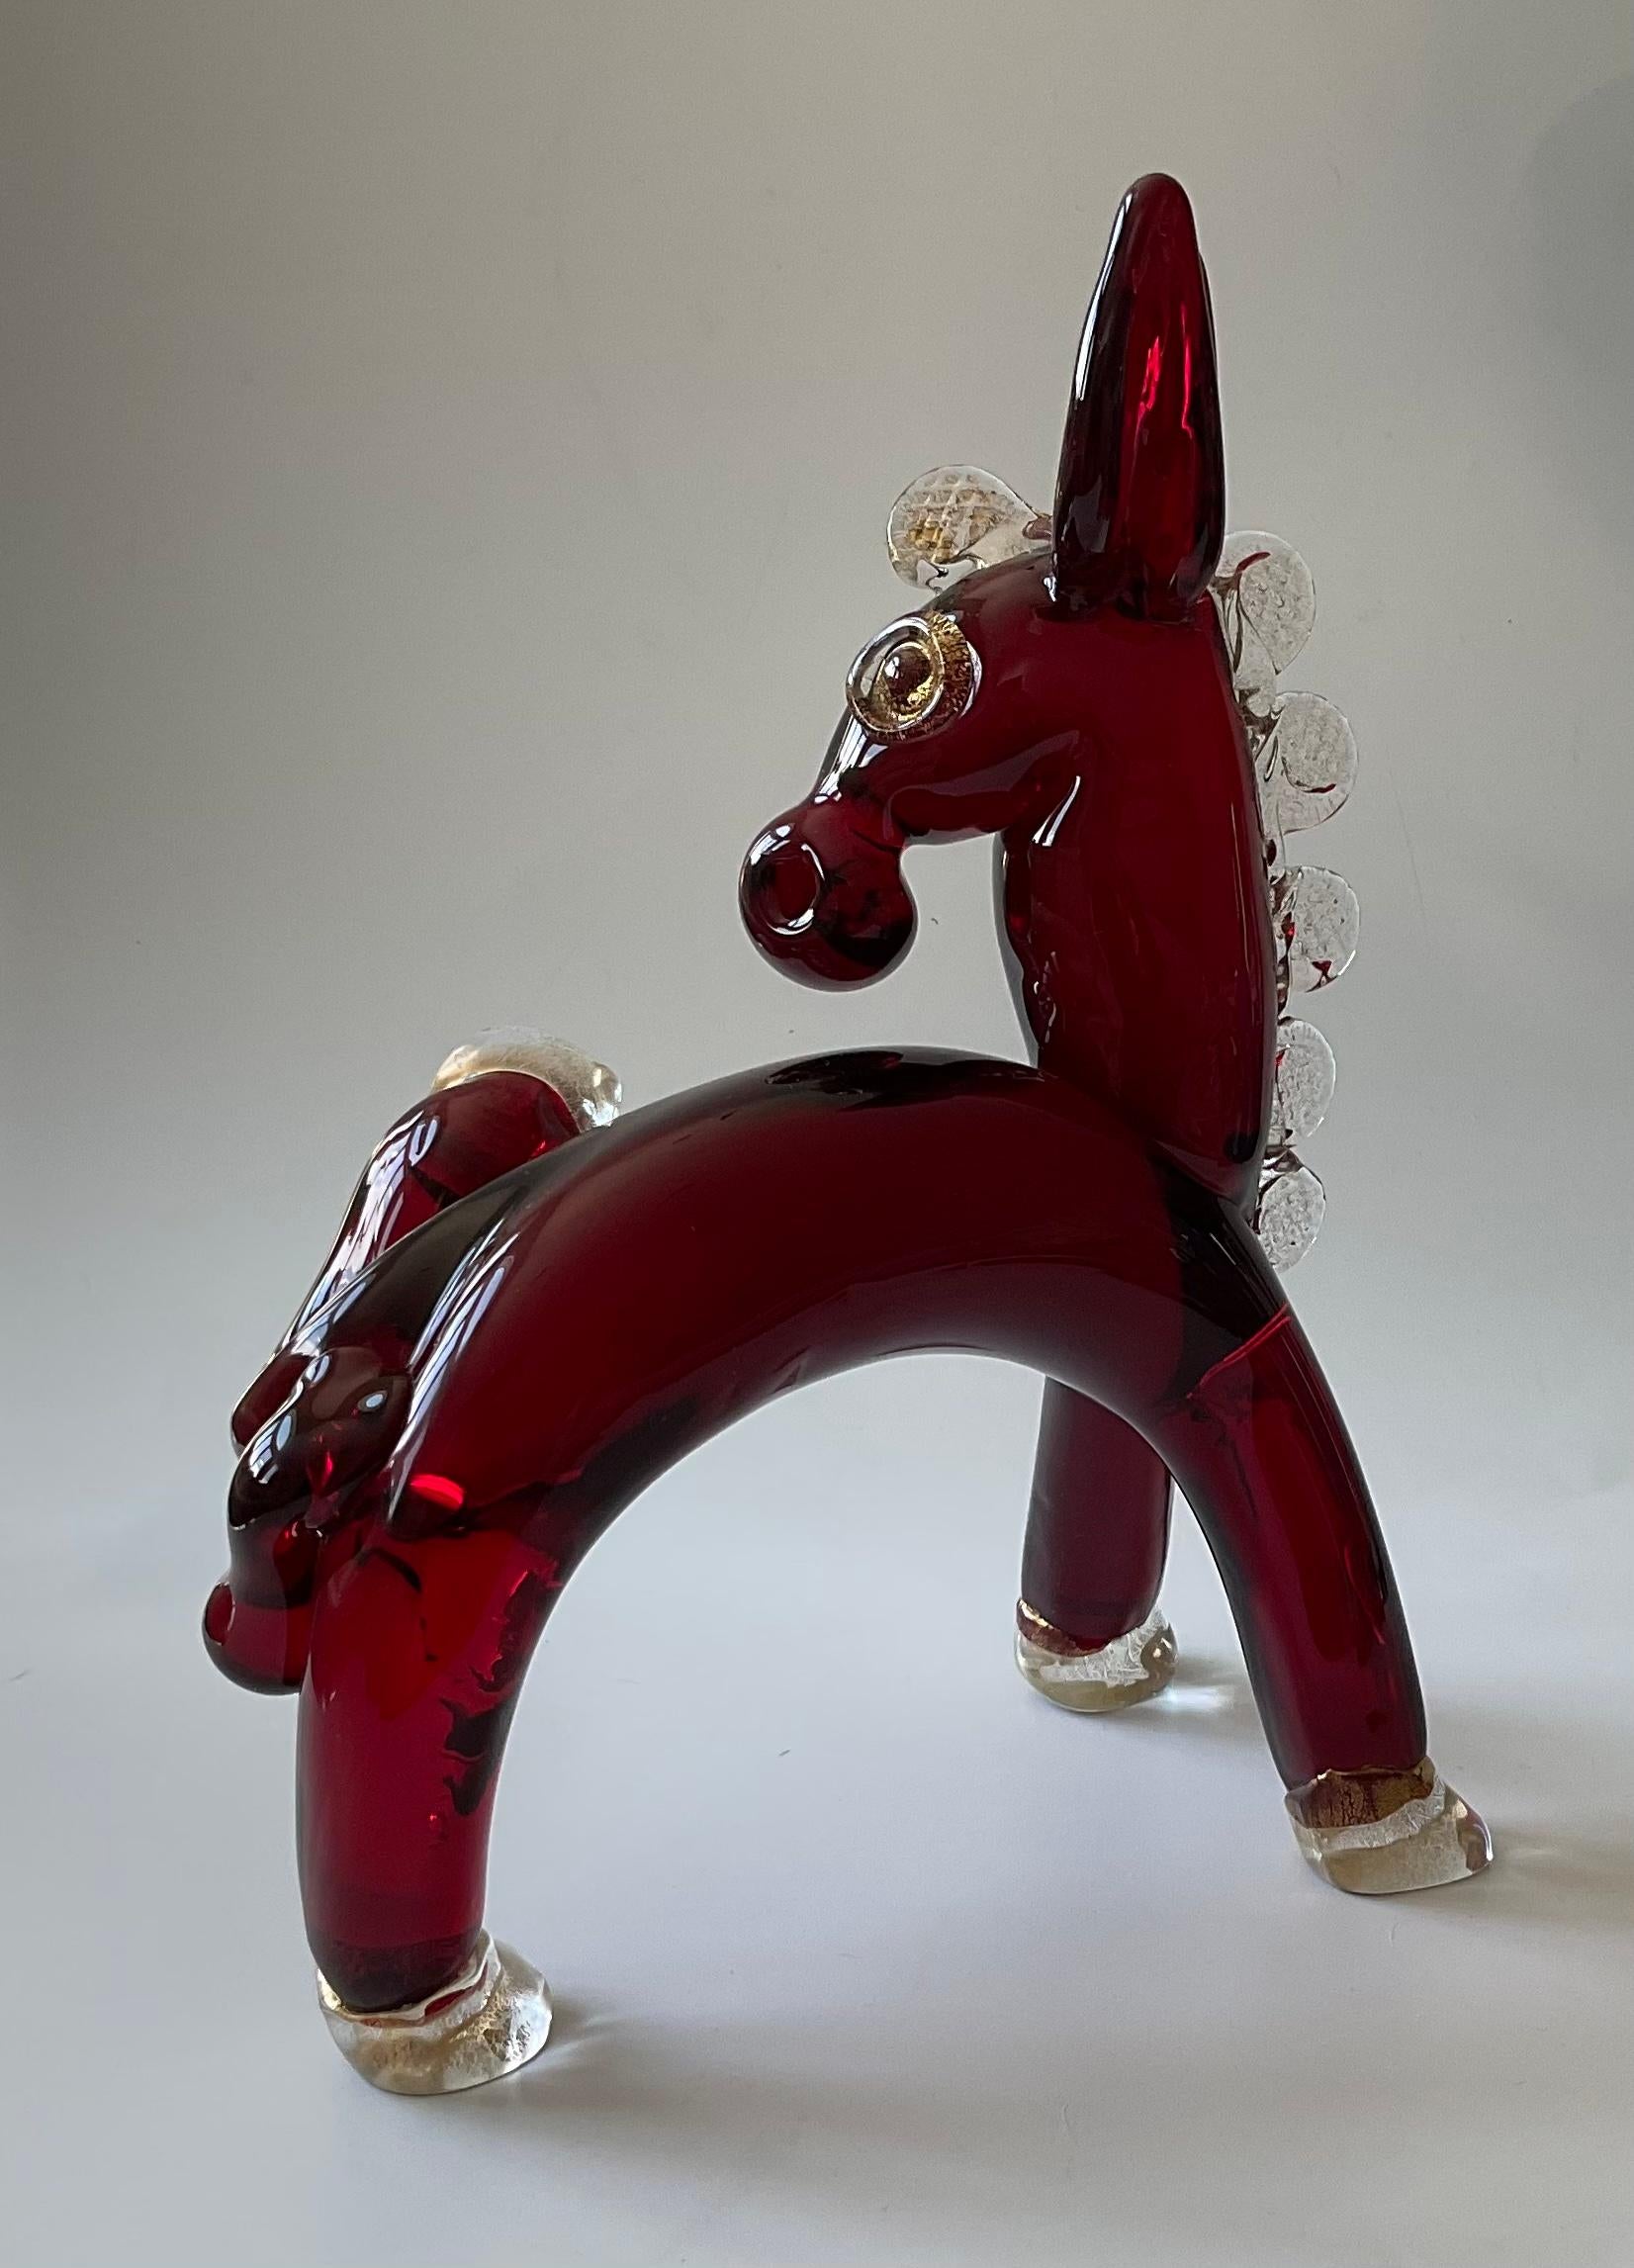 Art Deco Ercole Barovier for Barovier and Toso Rare Murano Glass Sculpture of a Donkey For Sale